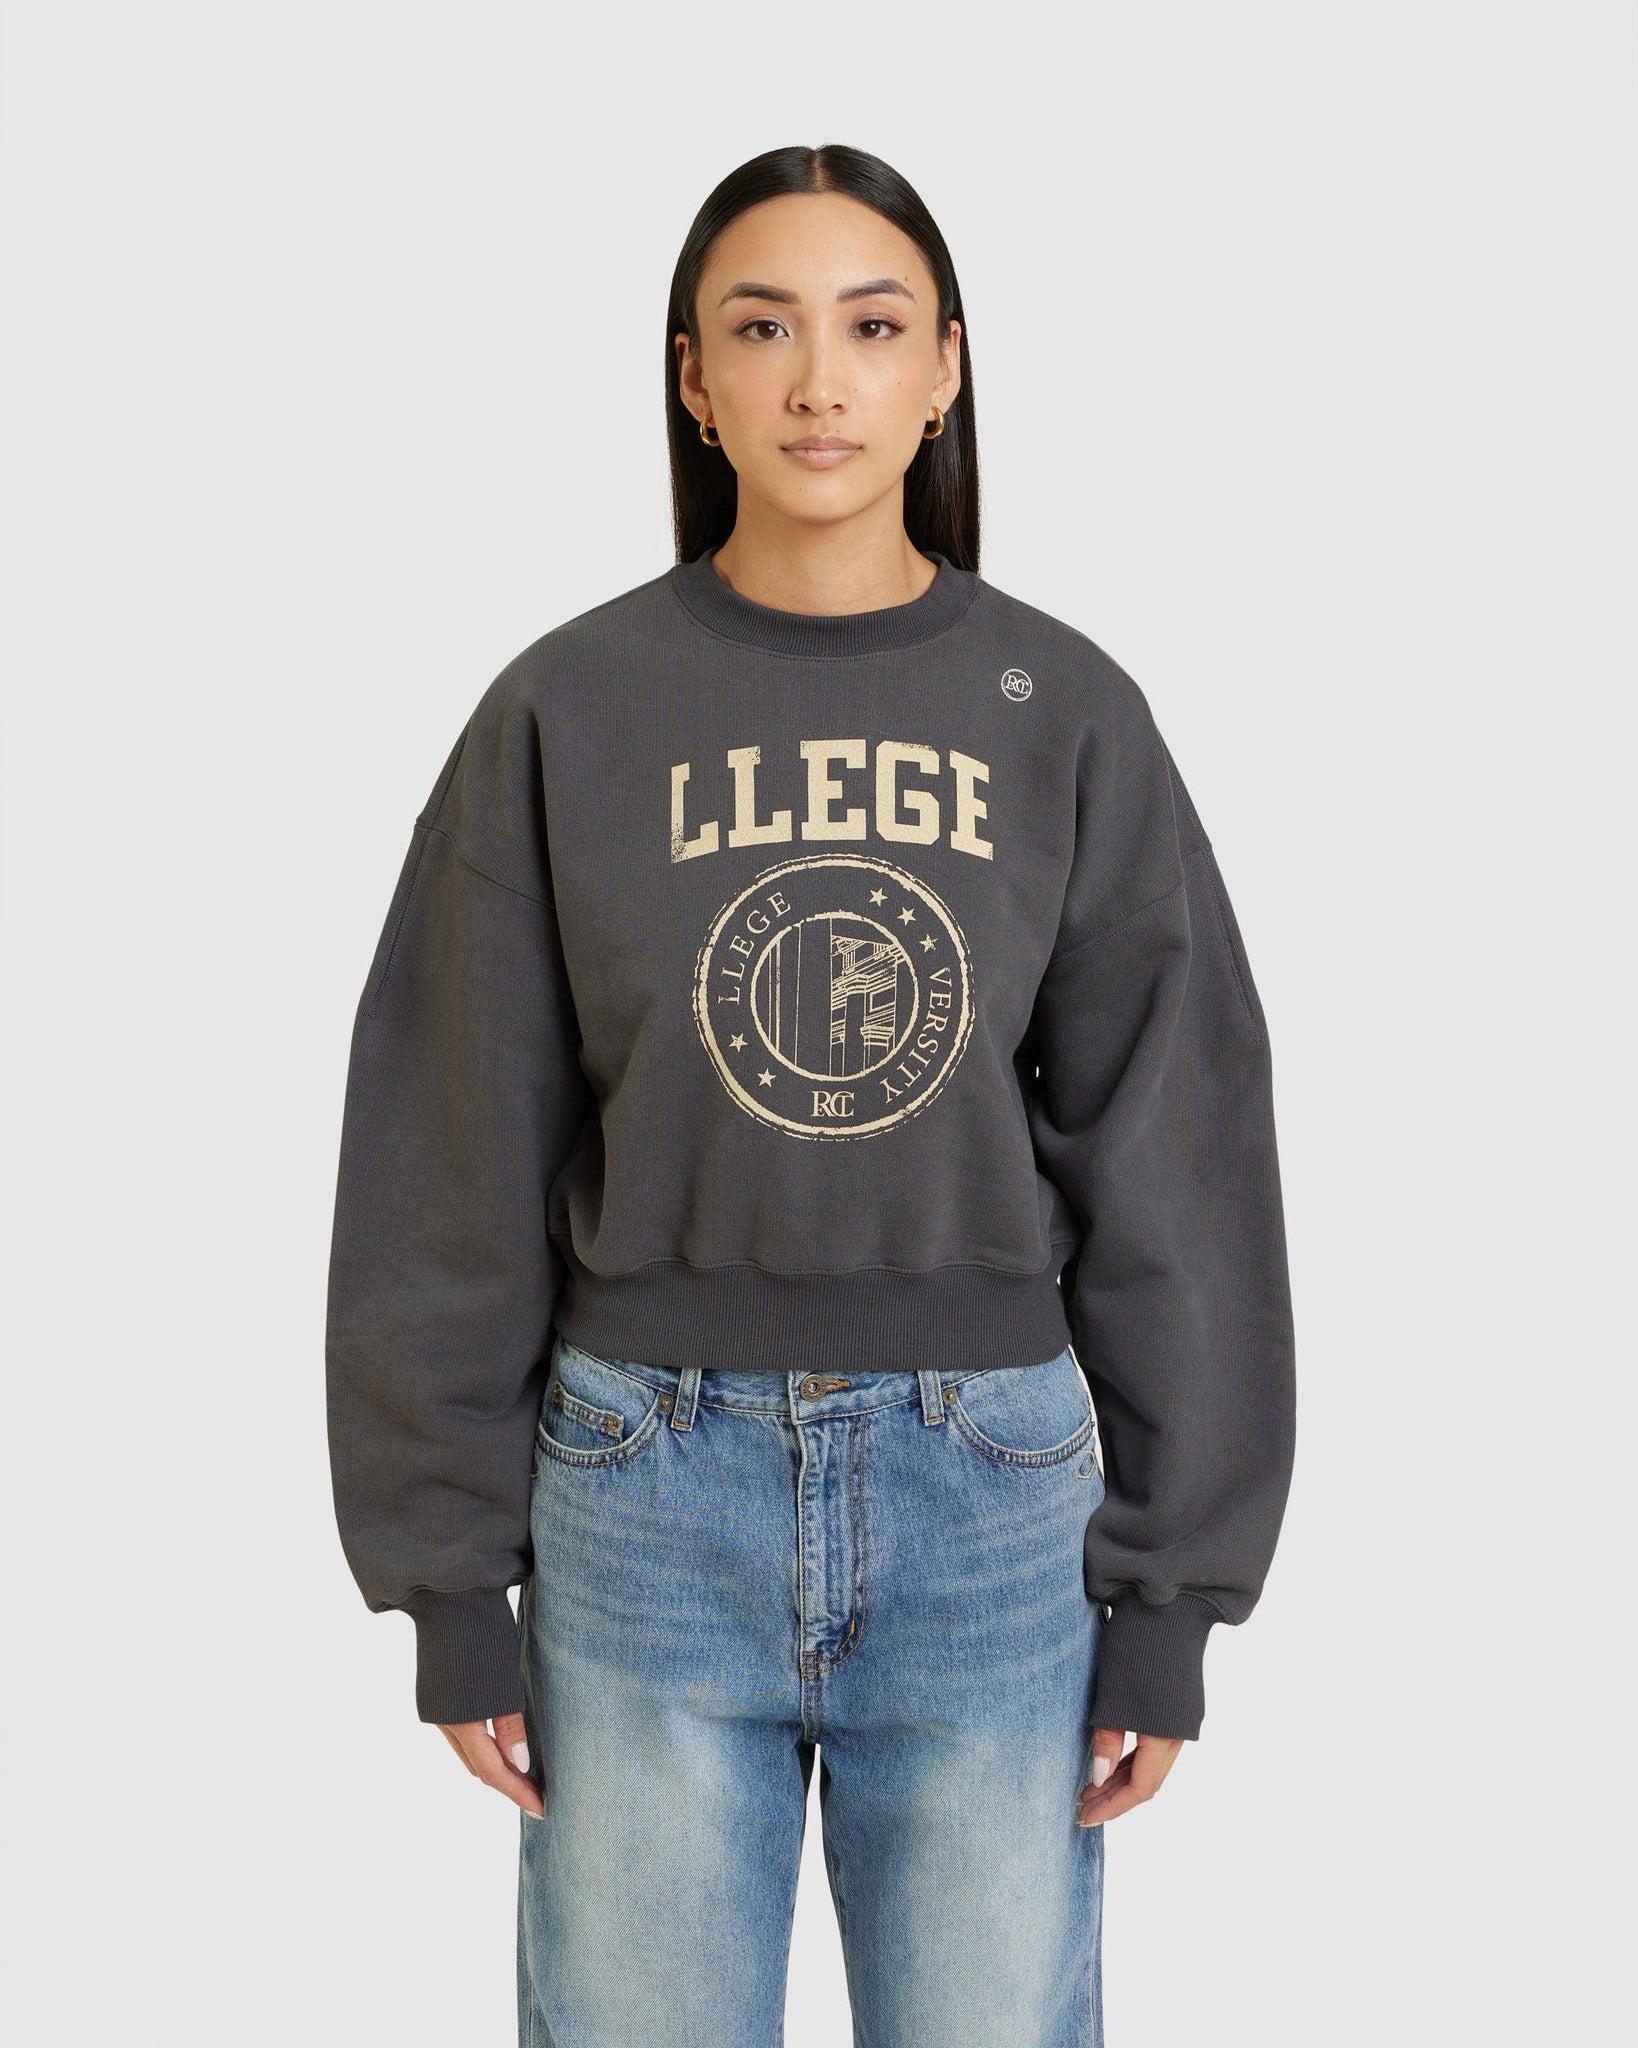 'Llege' Logo Sweatshirt Blueish Charcoal - {{ collection.title }} - Chinatown Country Club 